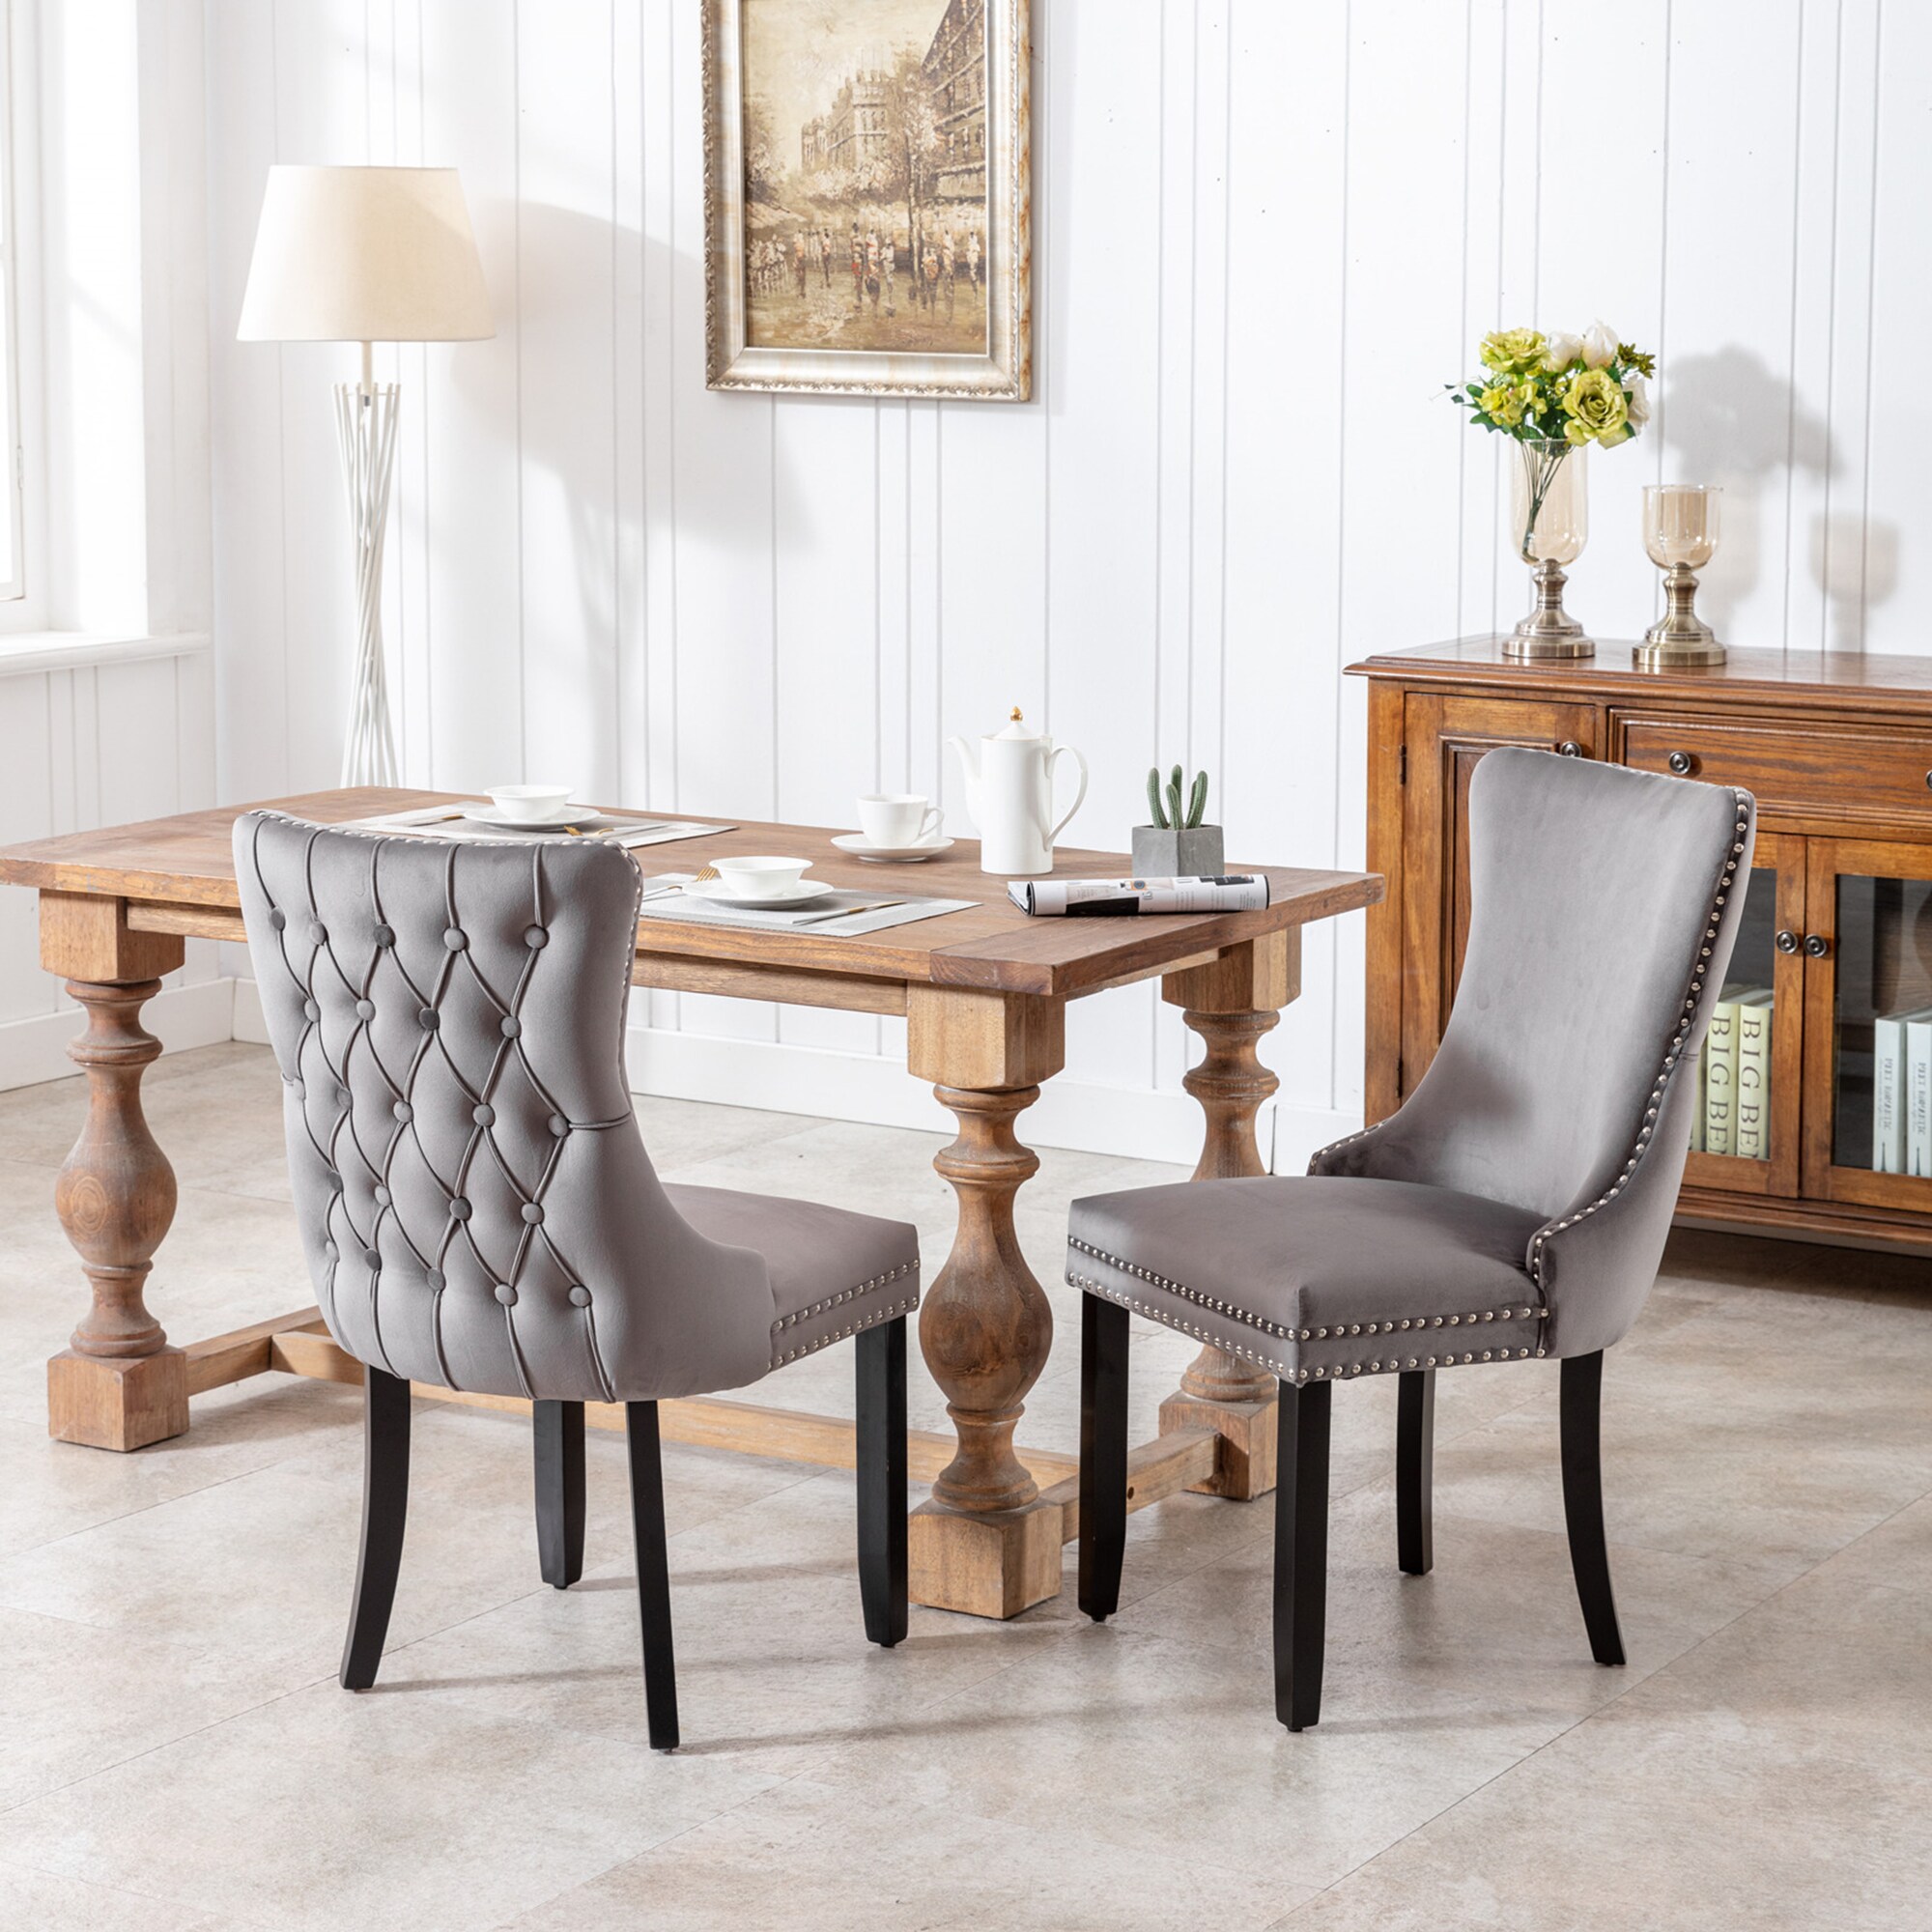  BELLEZE Farmhouse Dining Chairs Set of 2, Upholstered